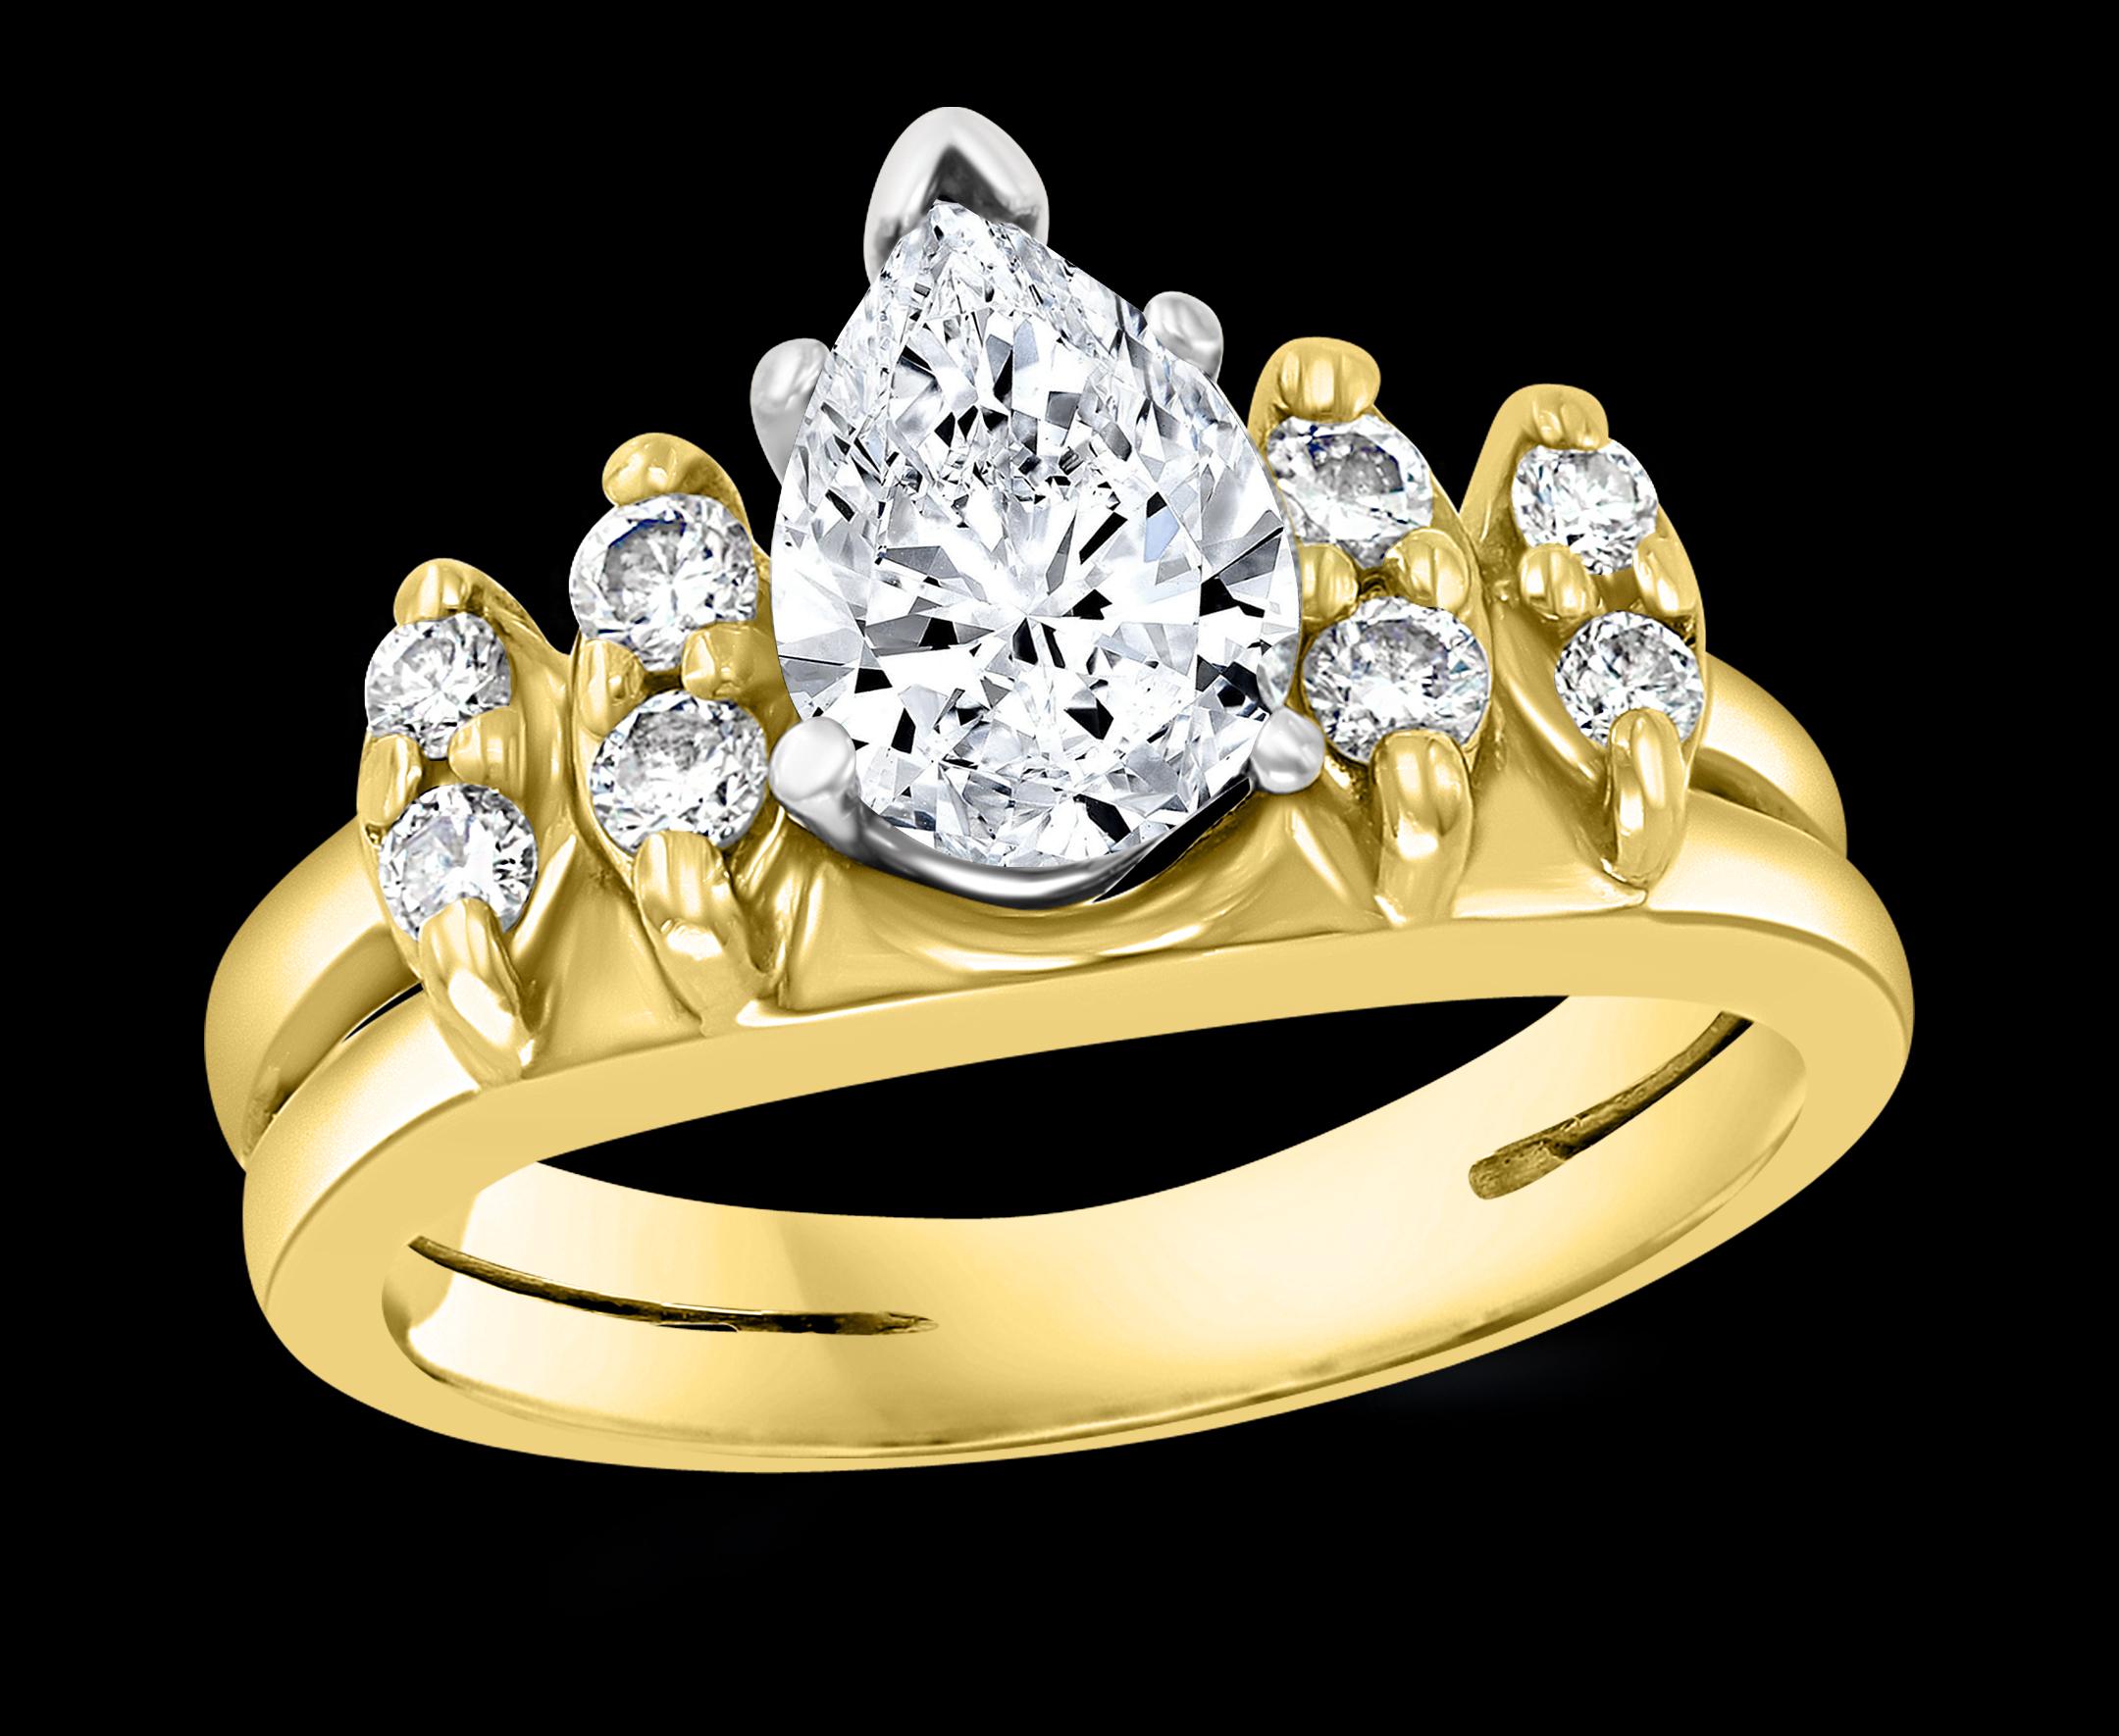 1 Carat Center Diamond  Engagement 14 Karat  Yellow Gold Ring  
14 K gold Stamped  4.5 Grams
Diamond VS quality and G/H color.
The size of the stone is roughly 8.5 X 5.7 which is almost equal to 1.20 ct approximately. Stone was not taken out to